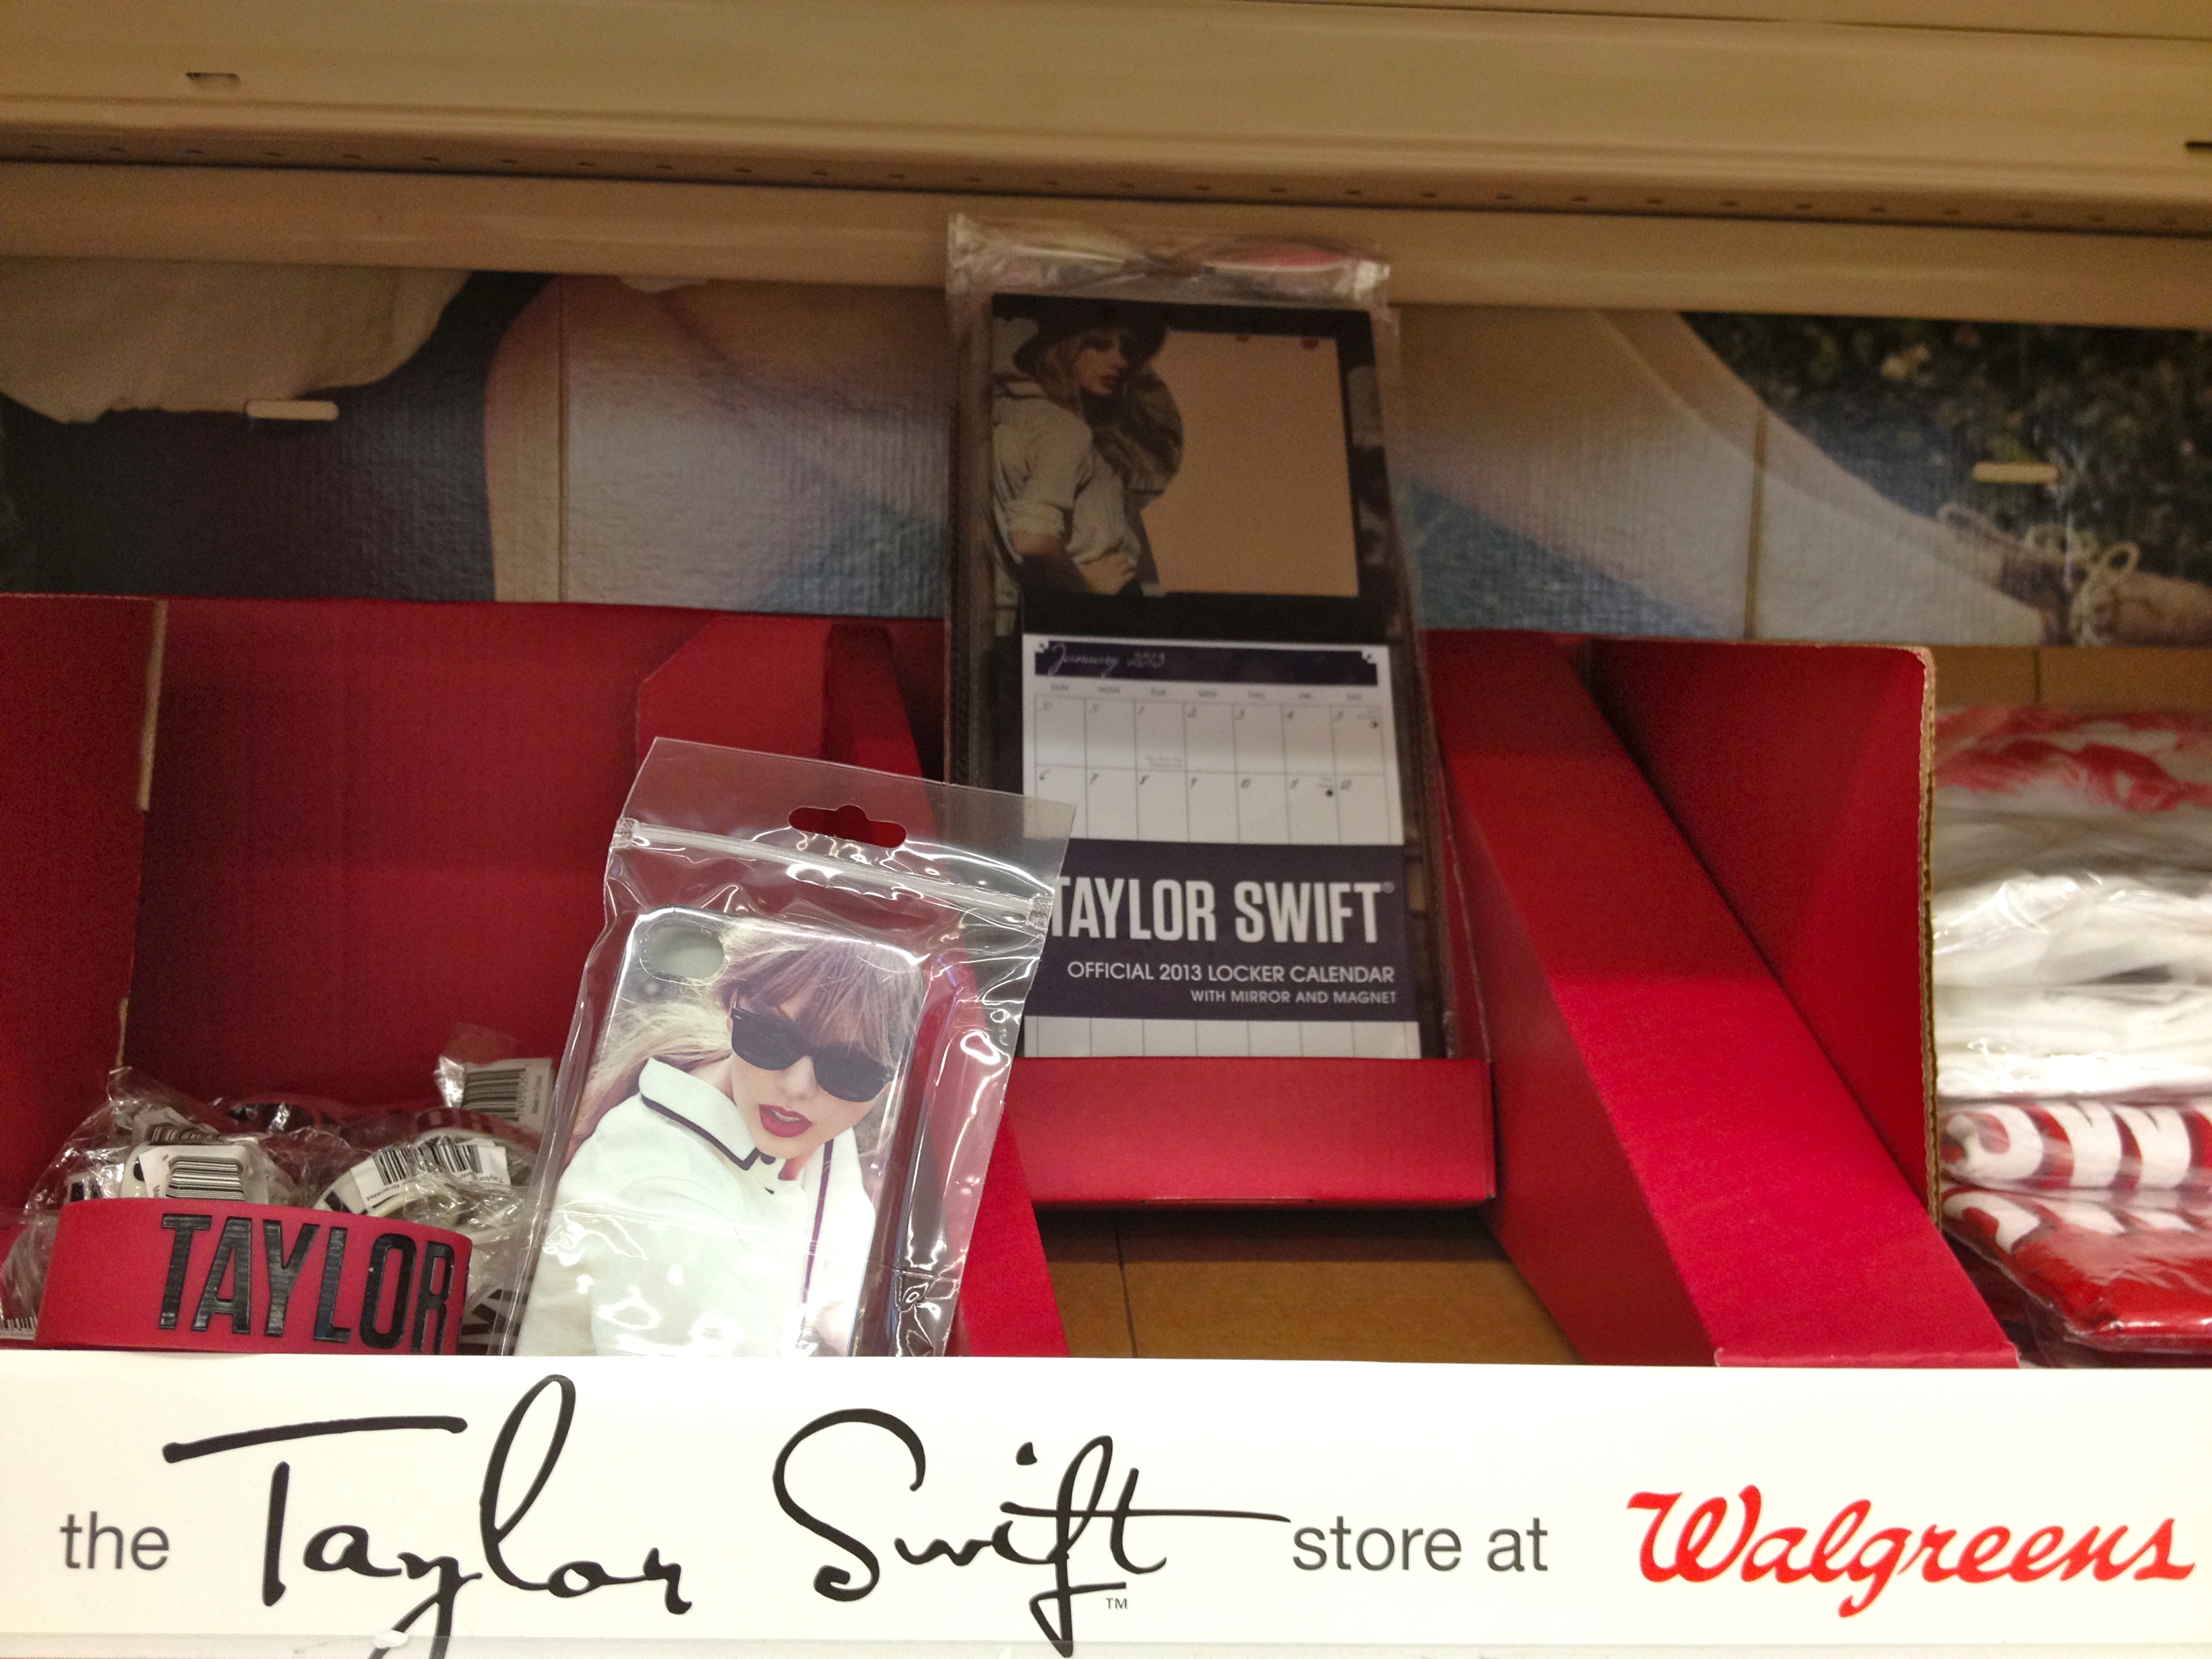 Taylor Swift Merchandise Exclusively at Walgreens | dtlalifestyle3264 x 2448